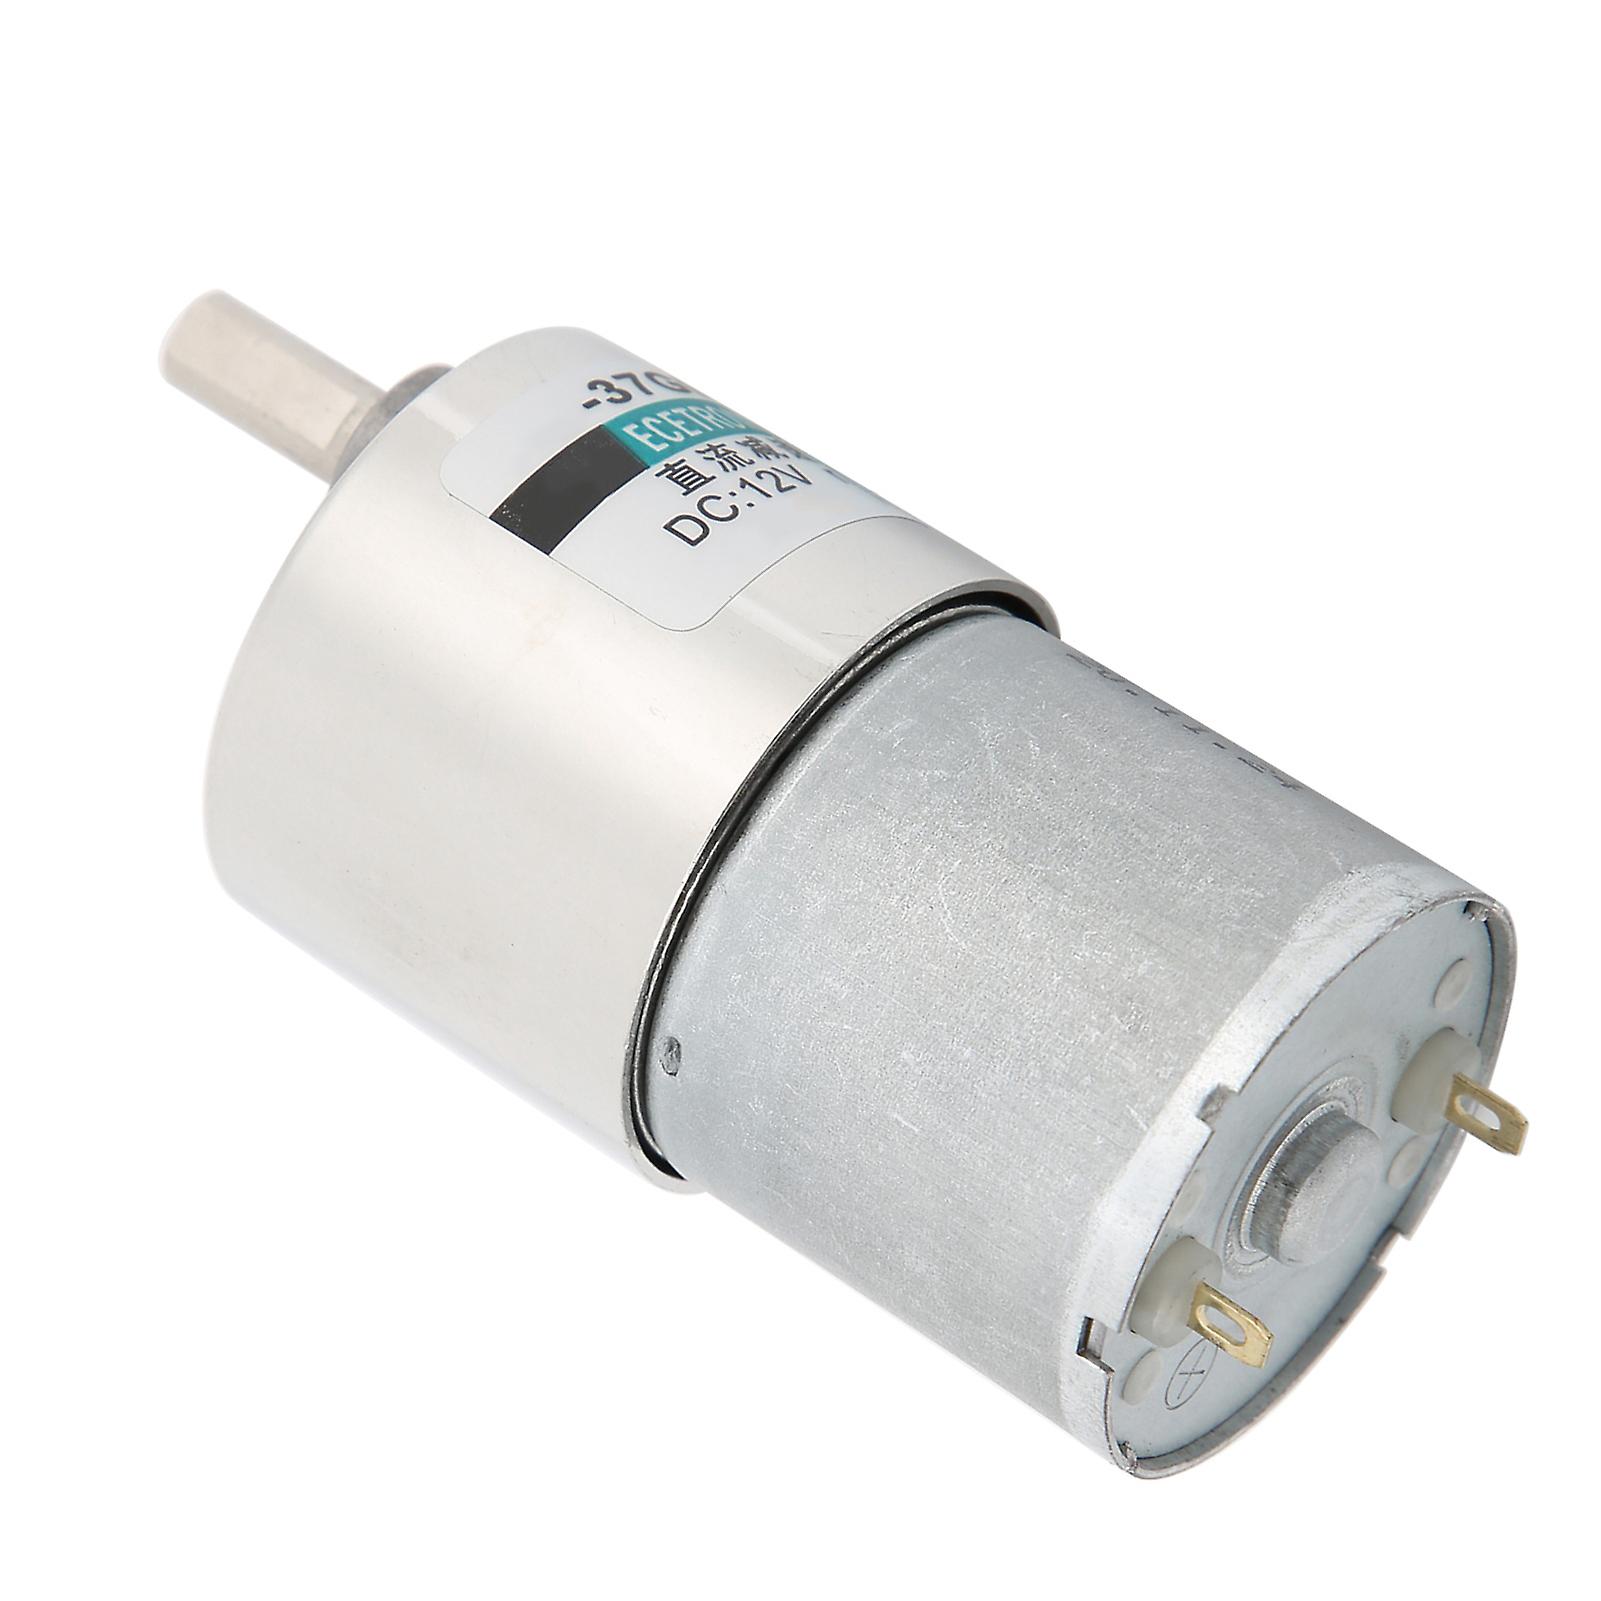 Dc Reduction Motor All Metal Gear Low Speed For Electronic Manufacturing Equipment 12v20rpm/min